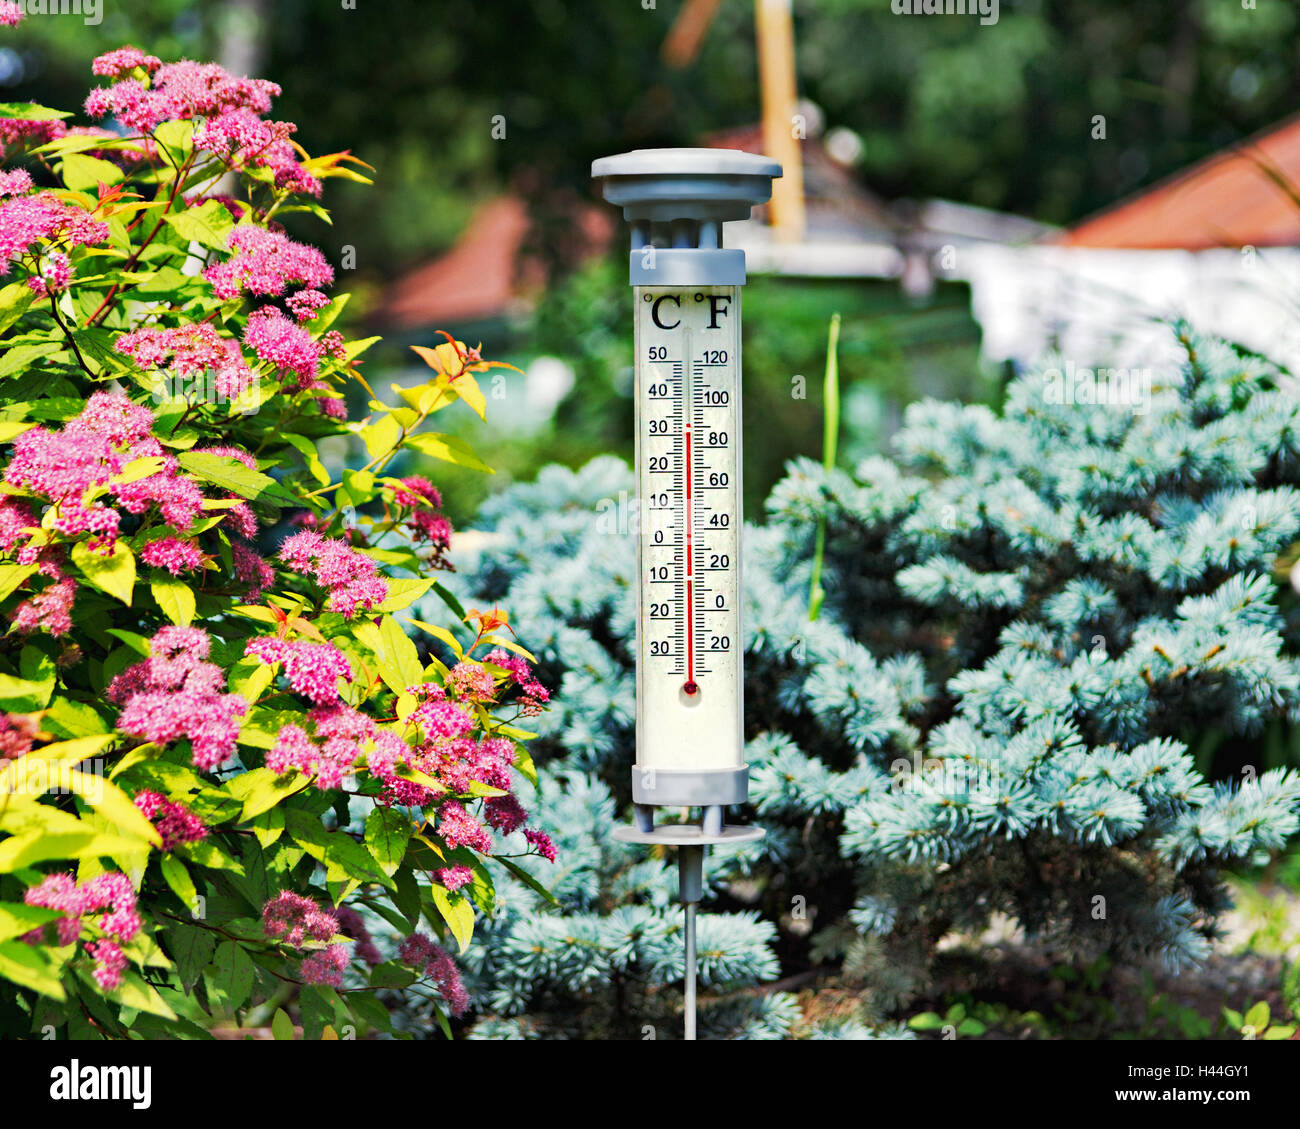 https://c8.alamy.com/comp/H44GY1/modern-stylish-outdoor-thermometer-in-summer-garden-closeup-H44GY1.jpg